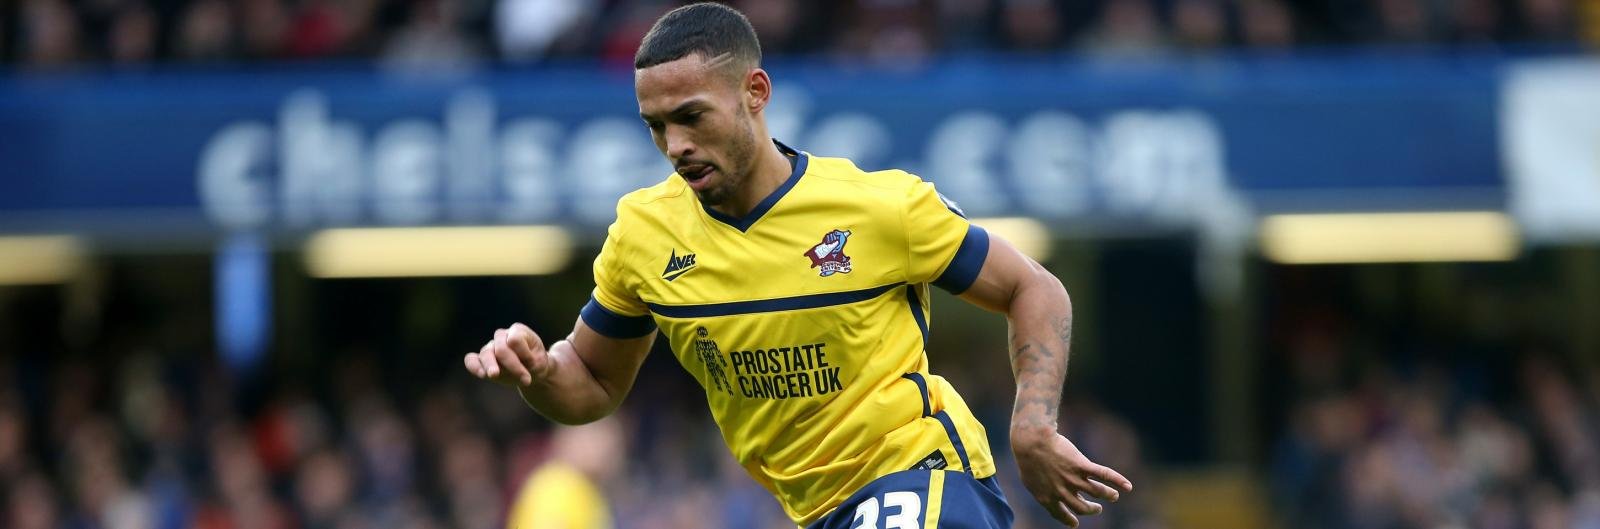 League One Round-Up: Scunthorpe smash Southend for four, Oxford defeat rivals Swindon